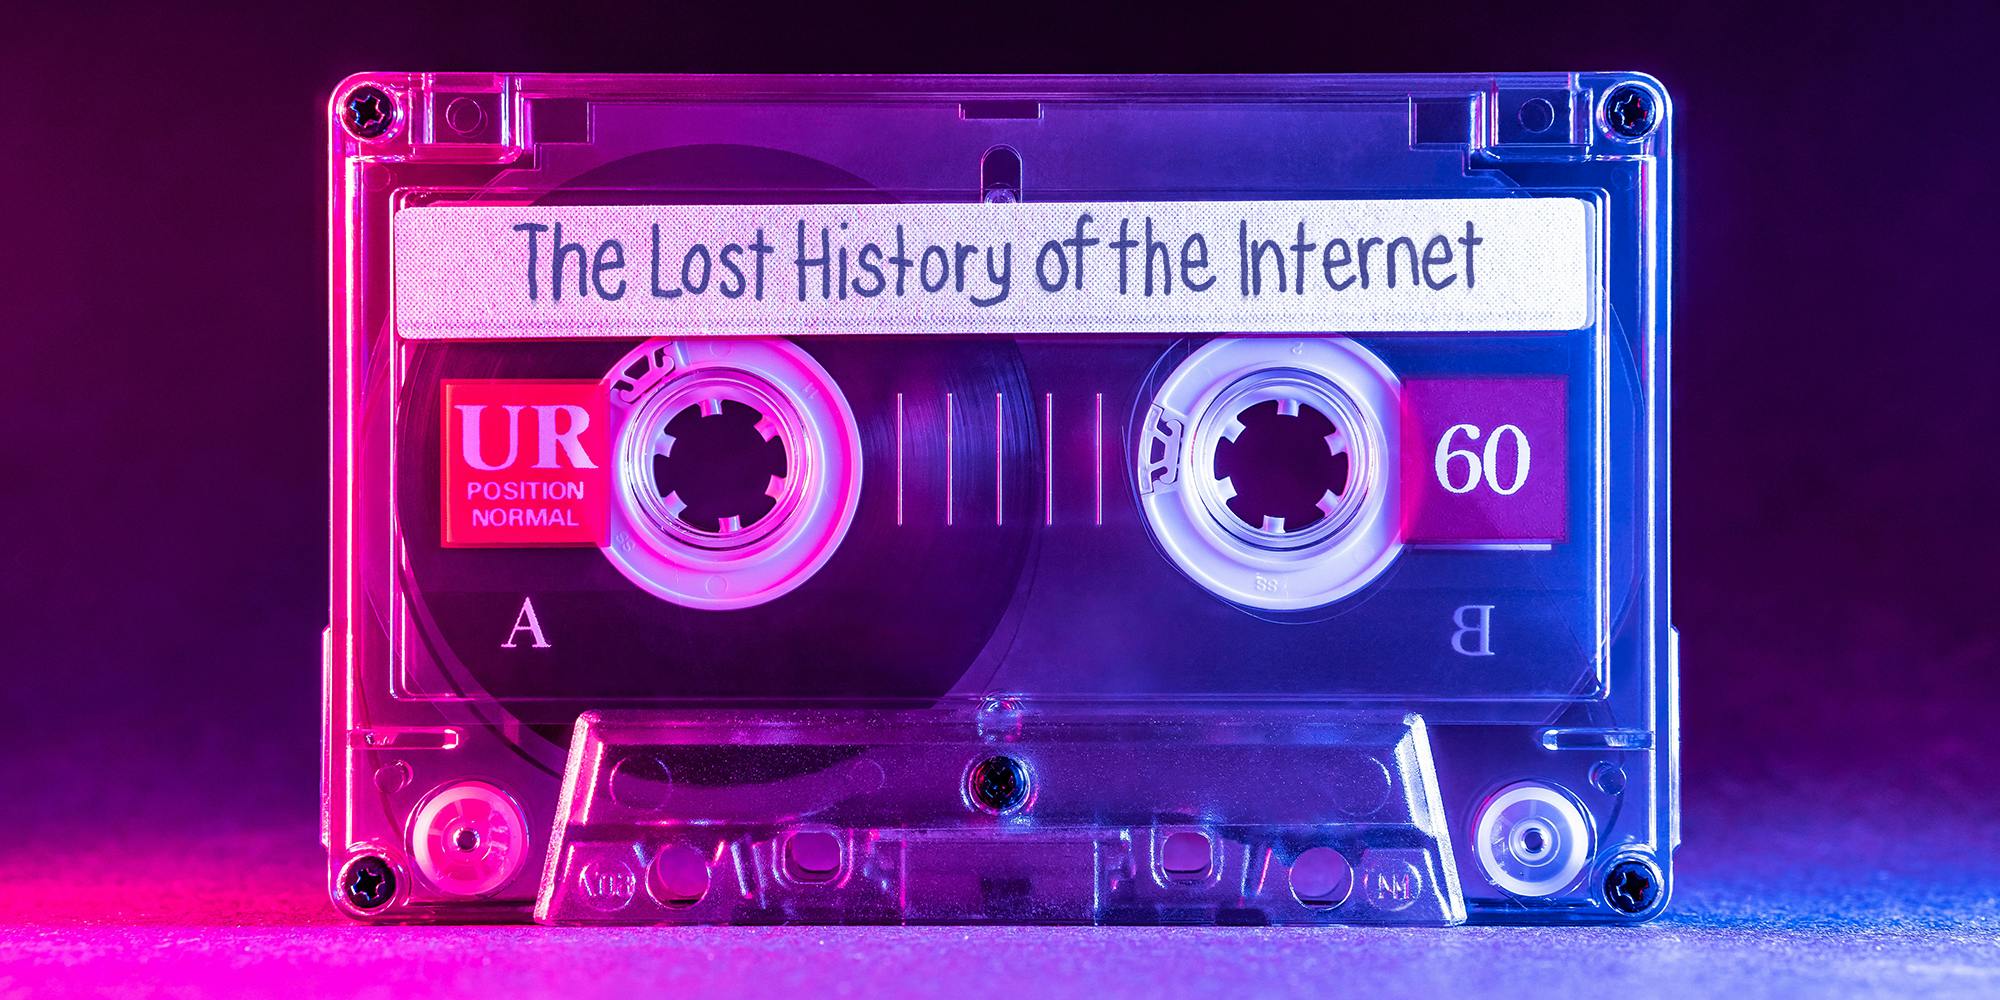 Transparent audio cassette tape lit by pink and blue lamps on a black background with "The Lost History of the Internet" written on the label.